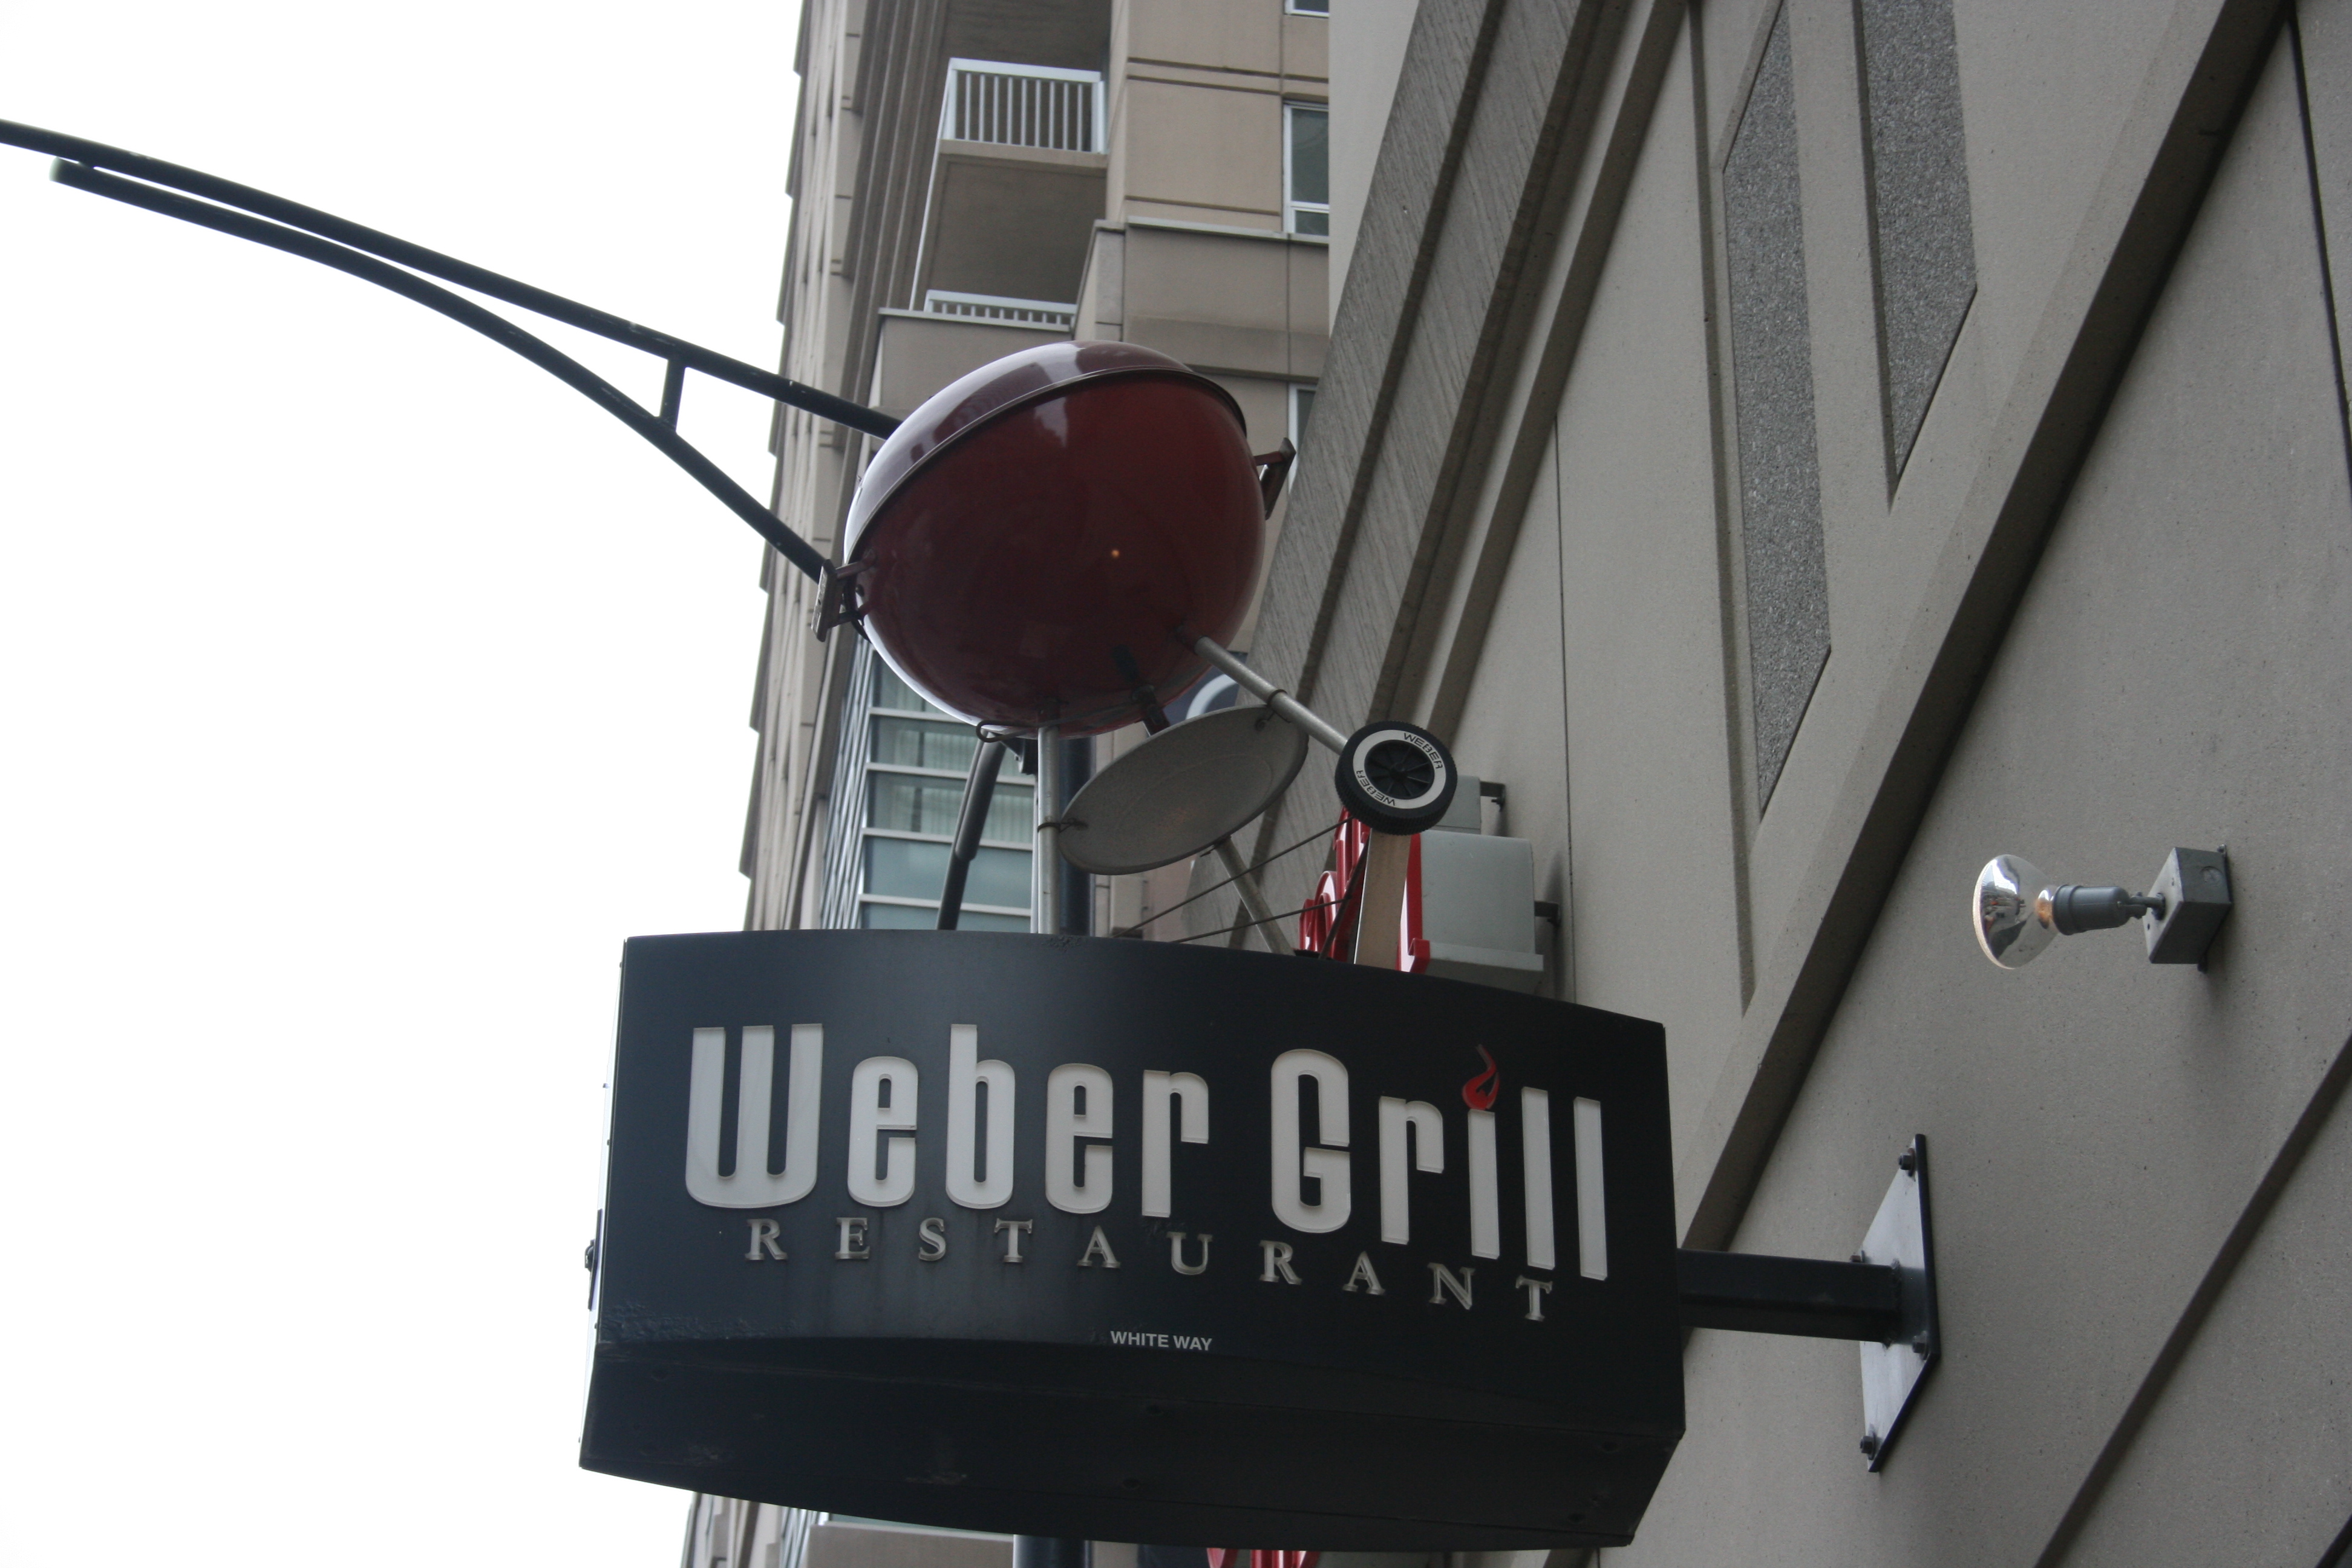 Weber Grill Academy Hosts Cooking Classes For Experts And Novices Alike Clayton Times - free robux generator no human verification marys meals